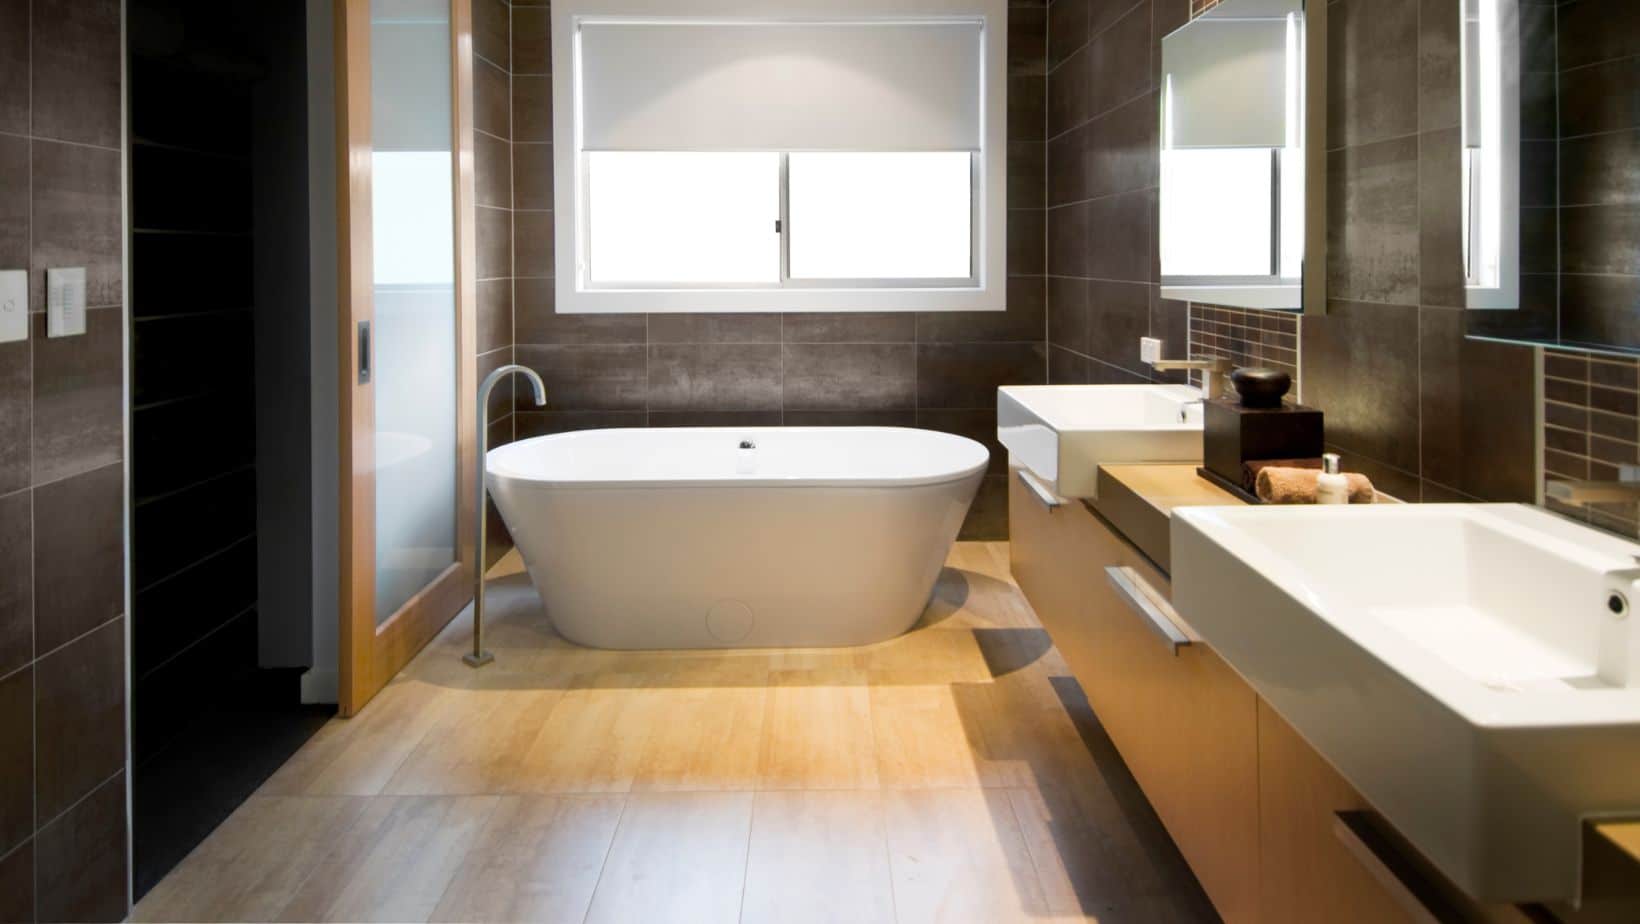 Modern bathroom style with brown contemporary double-sink cabinets, bath tub, and shower